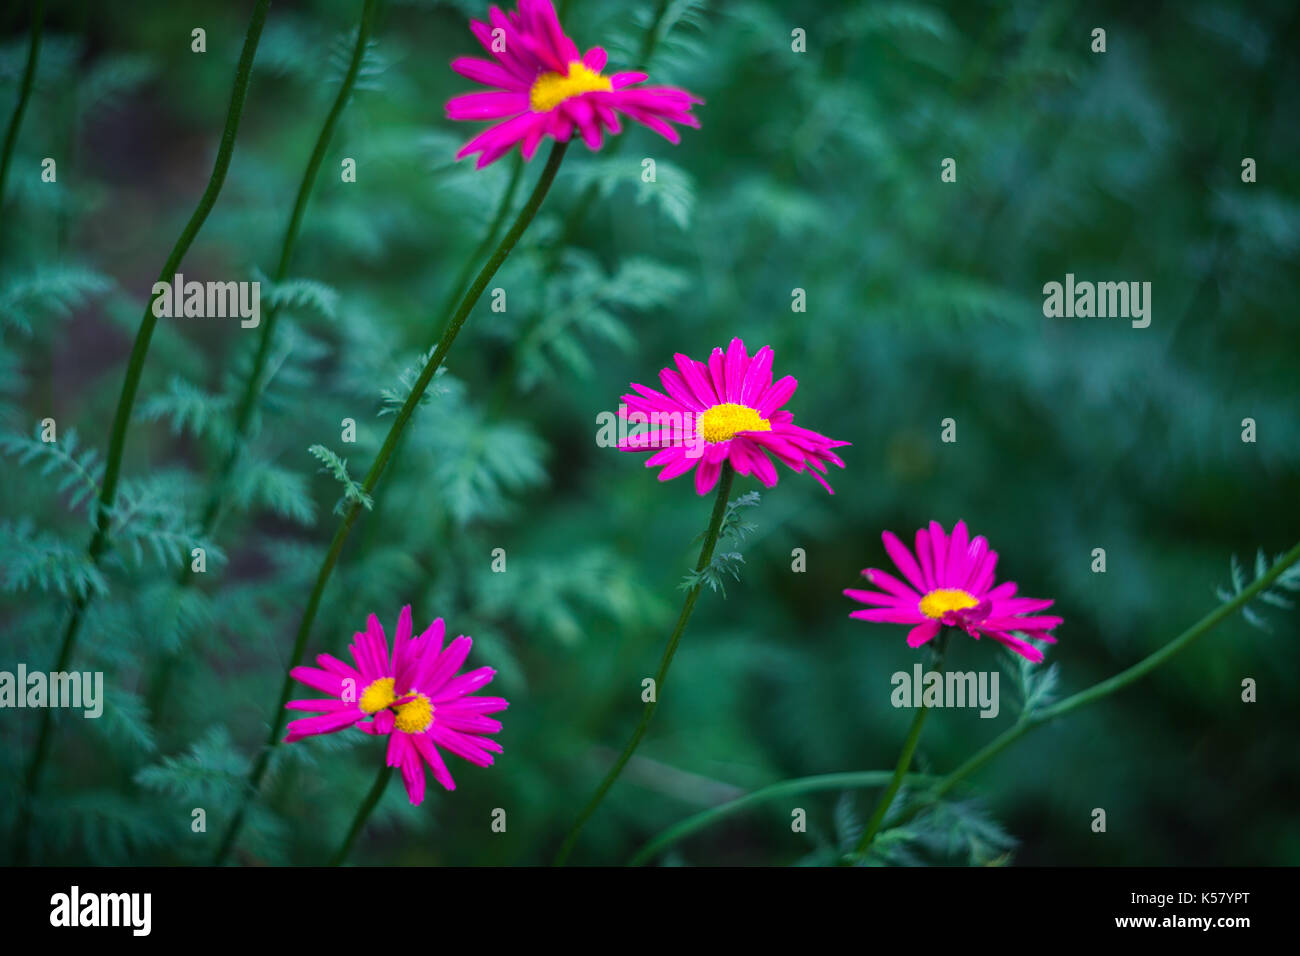 Crimson flowers of painted daisy growing in the garden. Blurred green natural background. Stock Photo